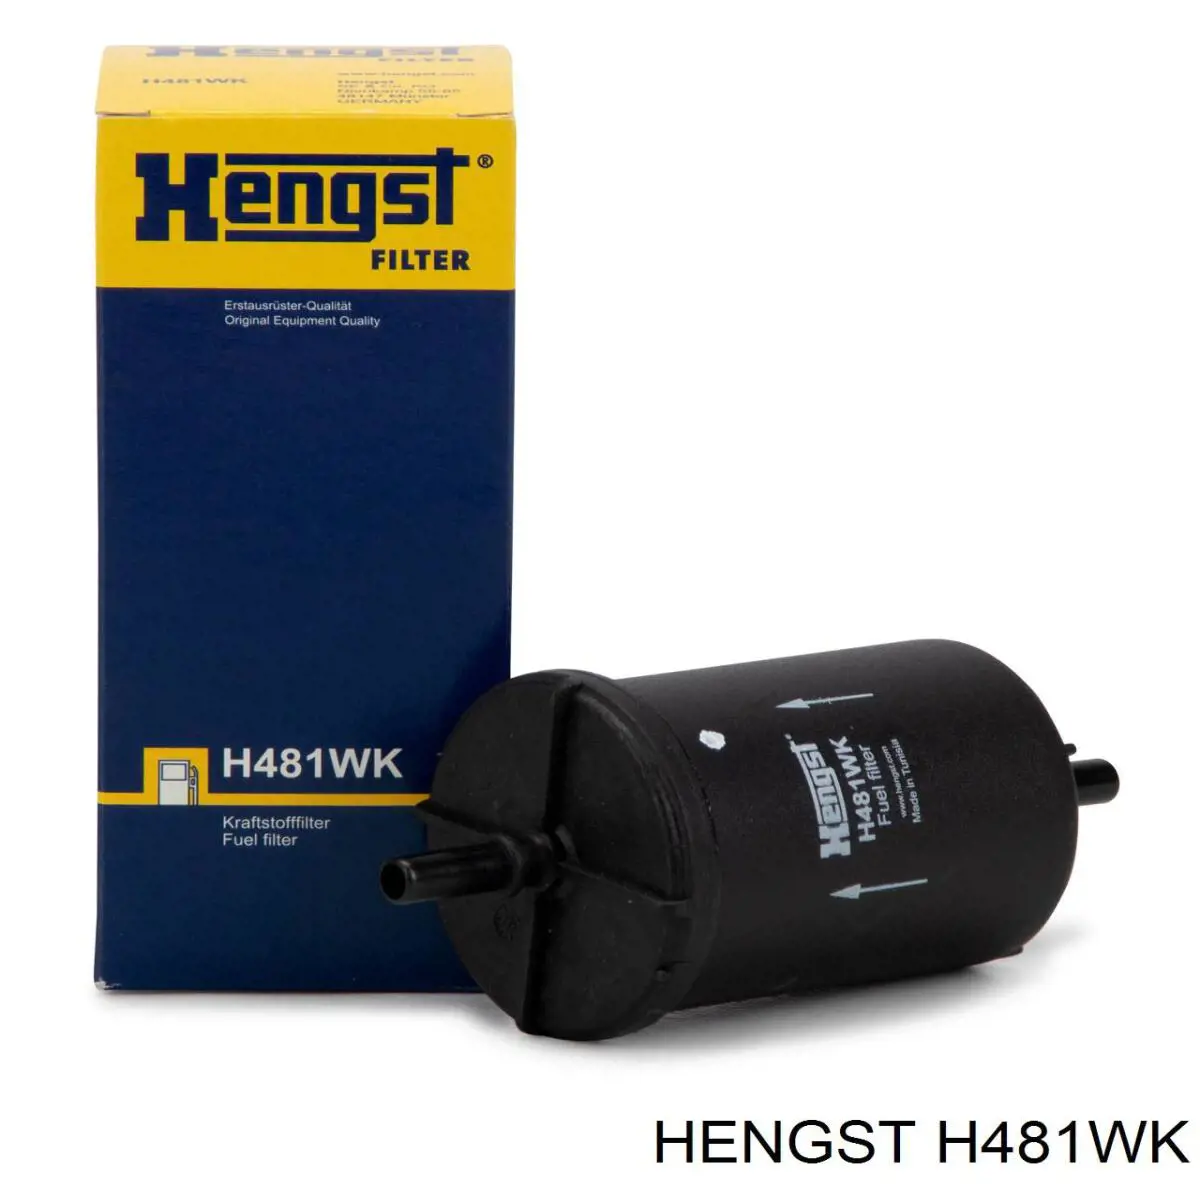 Filtro combustible H481WK Hengst